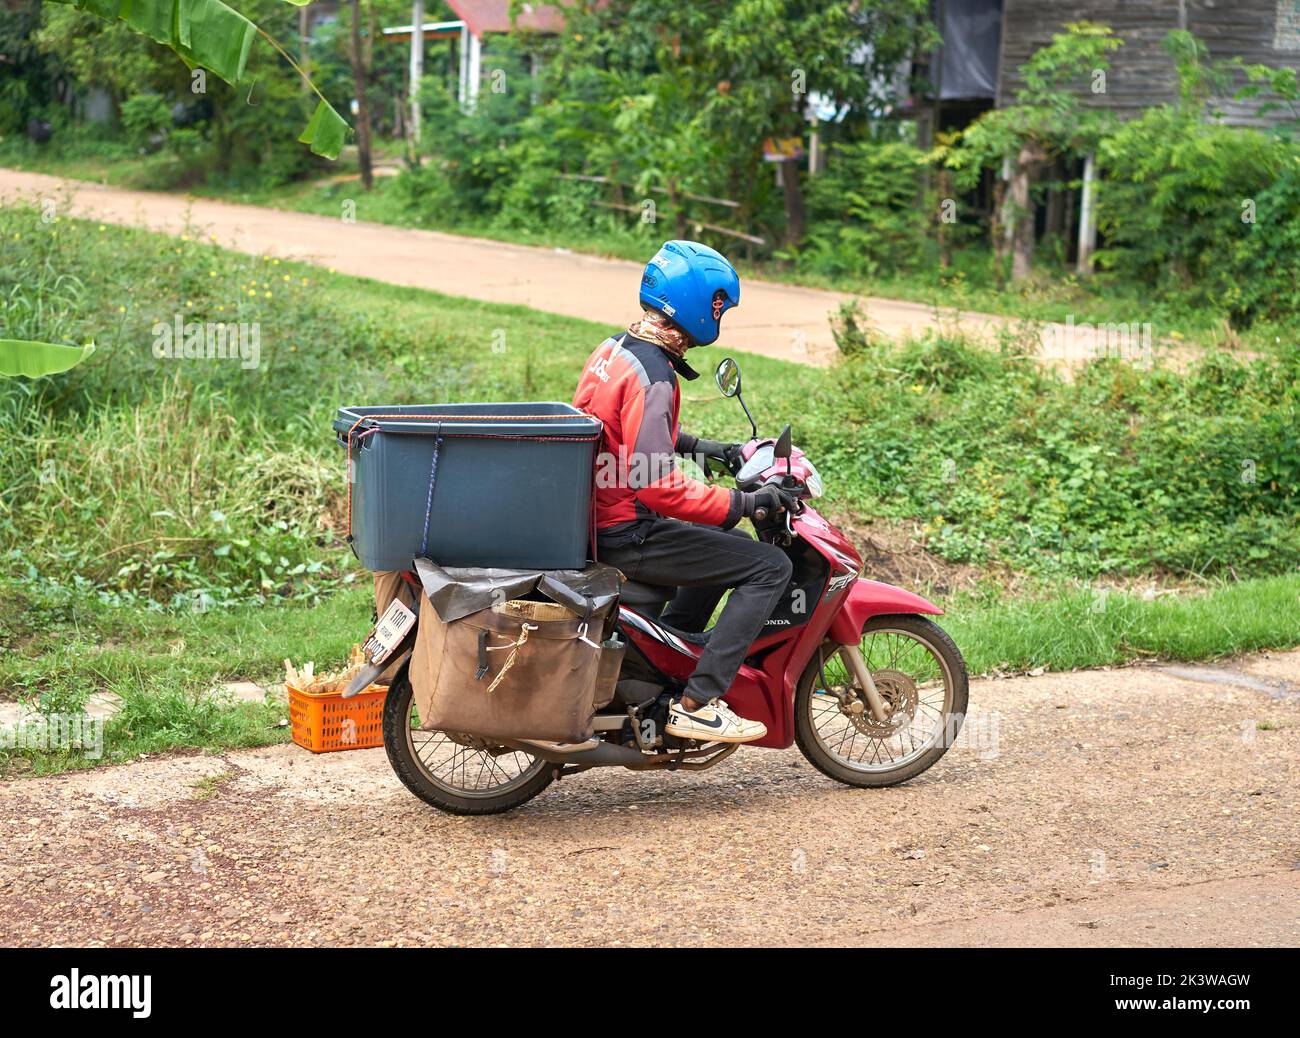 A motorcycle courier delivers packages in a rural area. Stock Photo